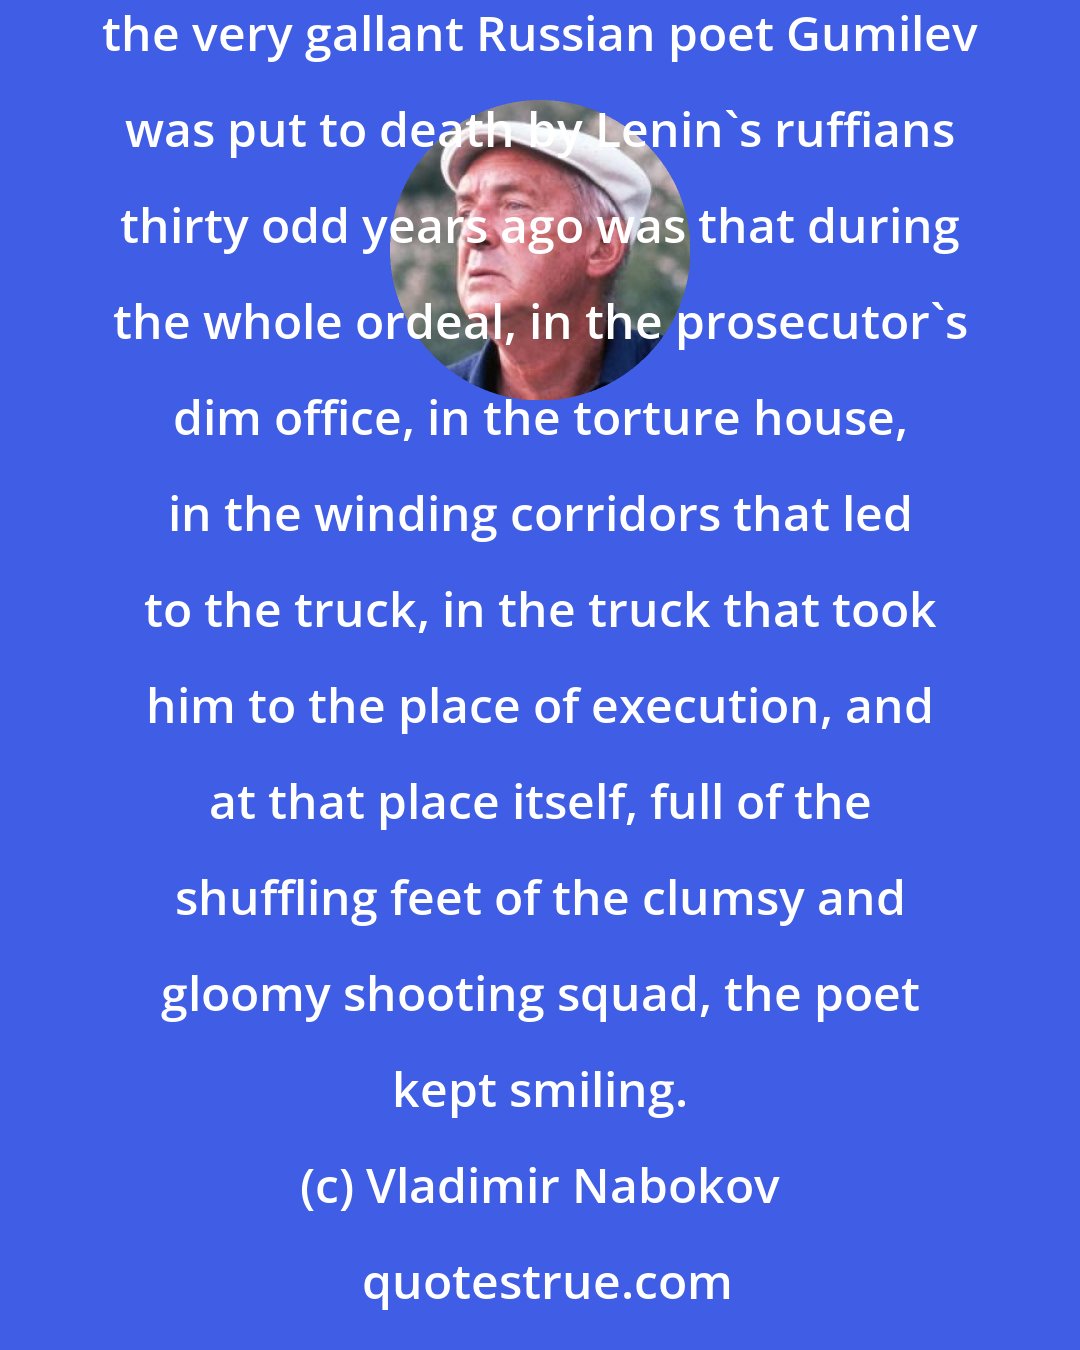 Vladimir Nabokov: There is nothing dictators hate so much as that unassailable, eternally elusive, eternally provoking gleam. One of the main reasons why the very gallant Russian poet Gumilev was put to death by Lenin's ruffians thirty odd years ago was that during the whole ordeal, in the prosecutor's dim office, in the torture house, in the winding corridors that led to the truck, in the truck that took him to the place of execution, and at that place itself, full of the shuffling feet of the clumsy and gloomy shooting squad, the poet kept smiling.